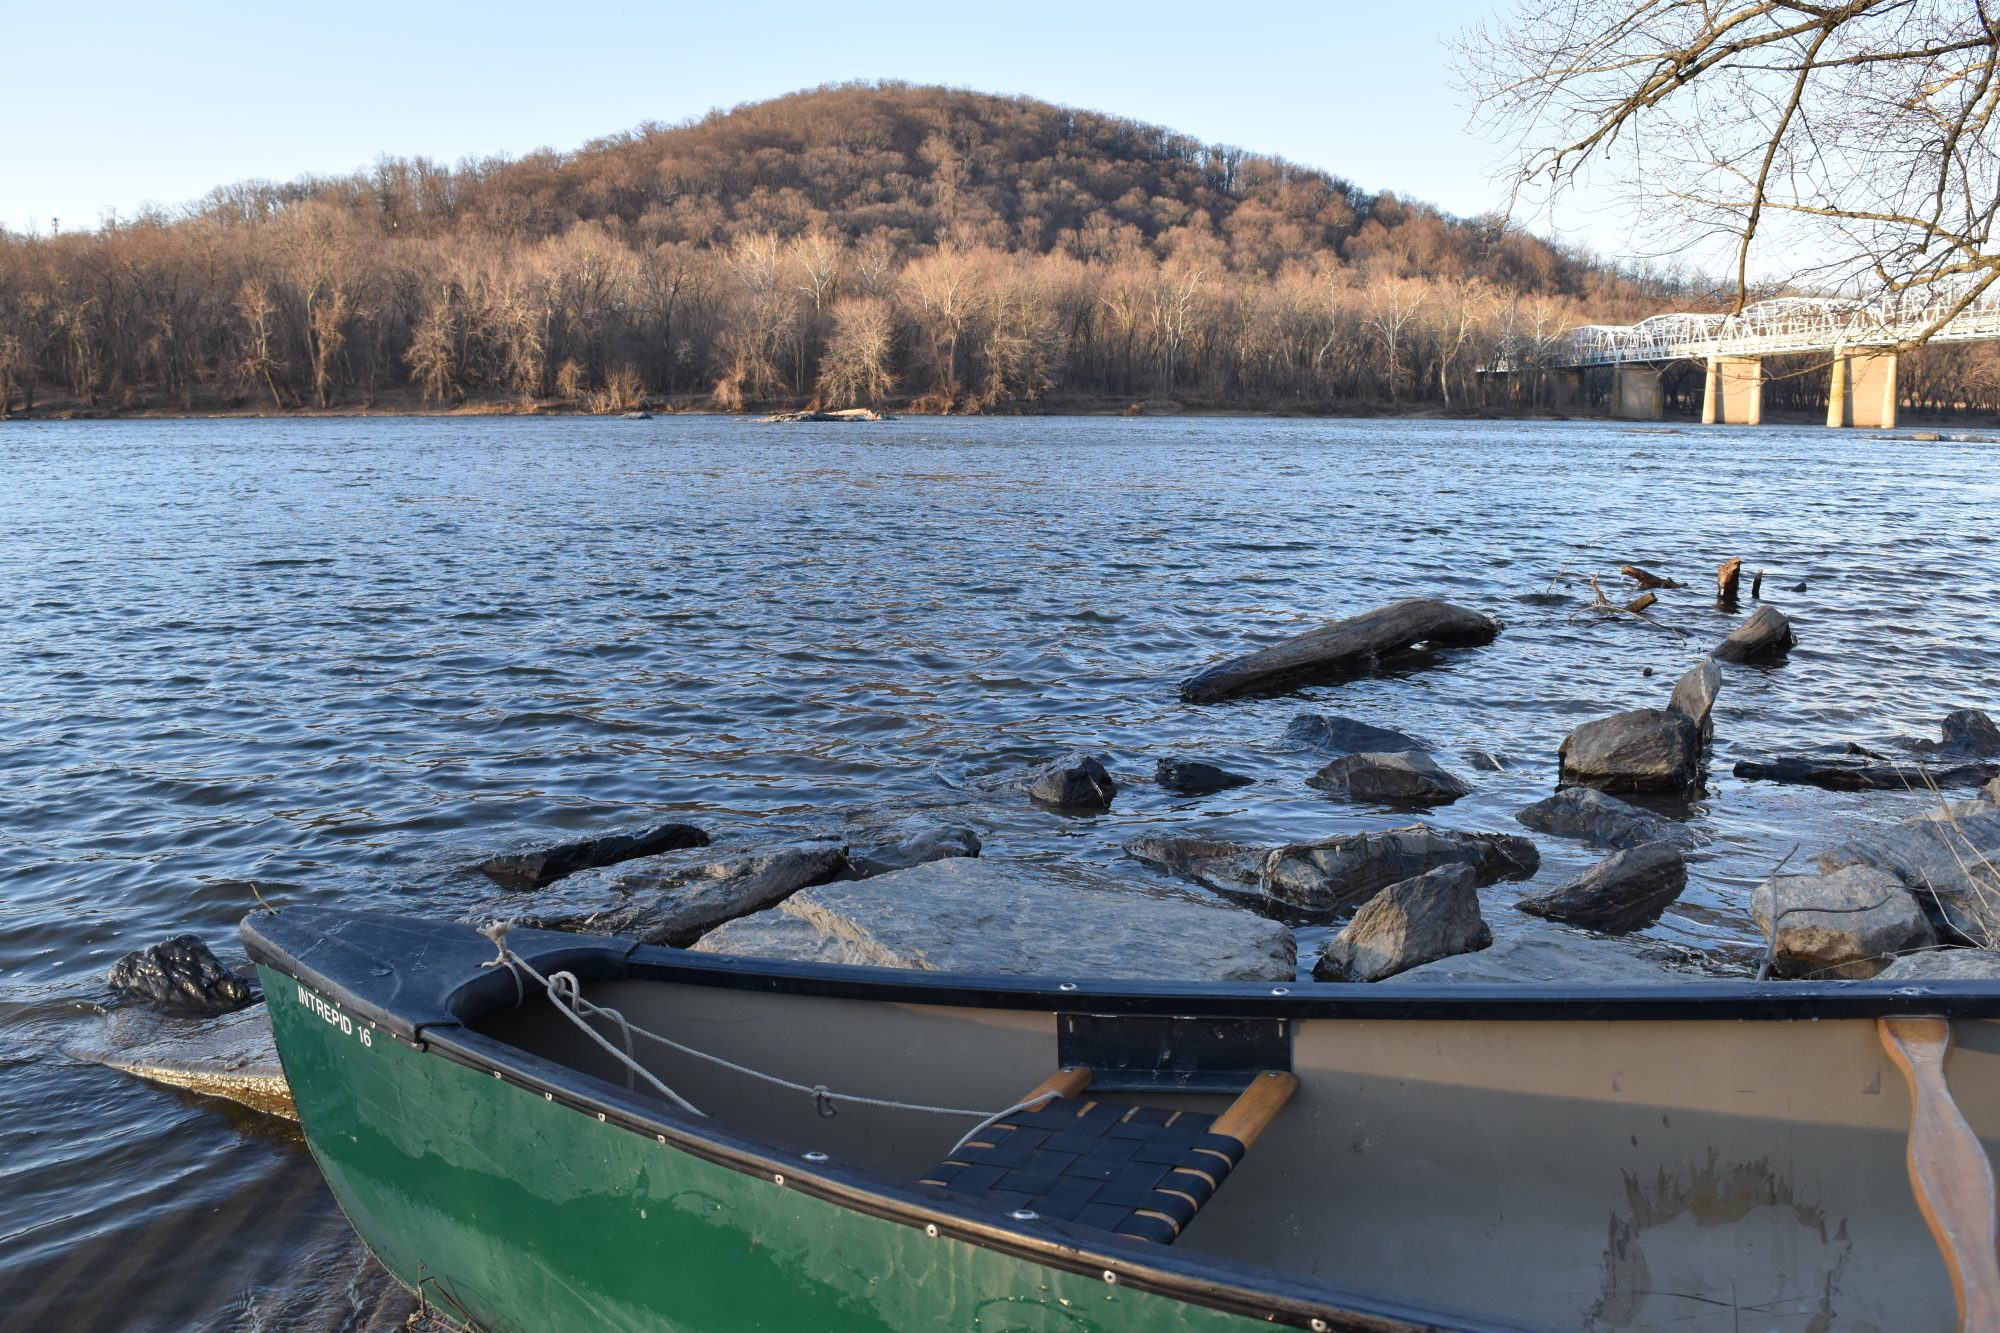 A canoe on the shoreline of the river with a winter forest in the background.